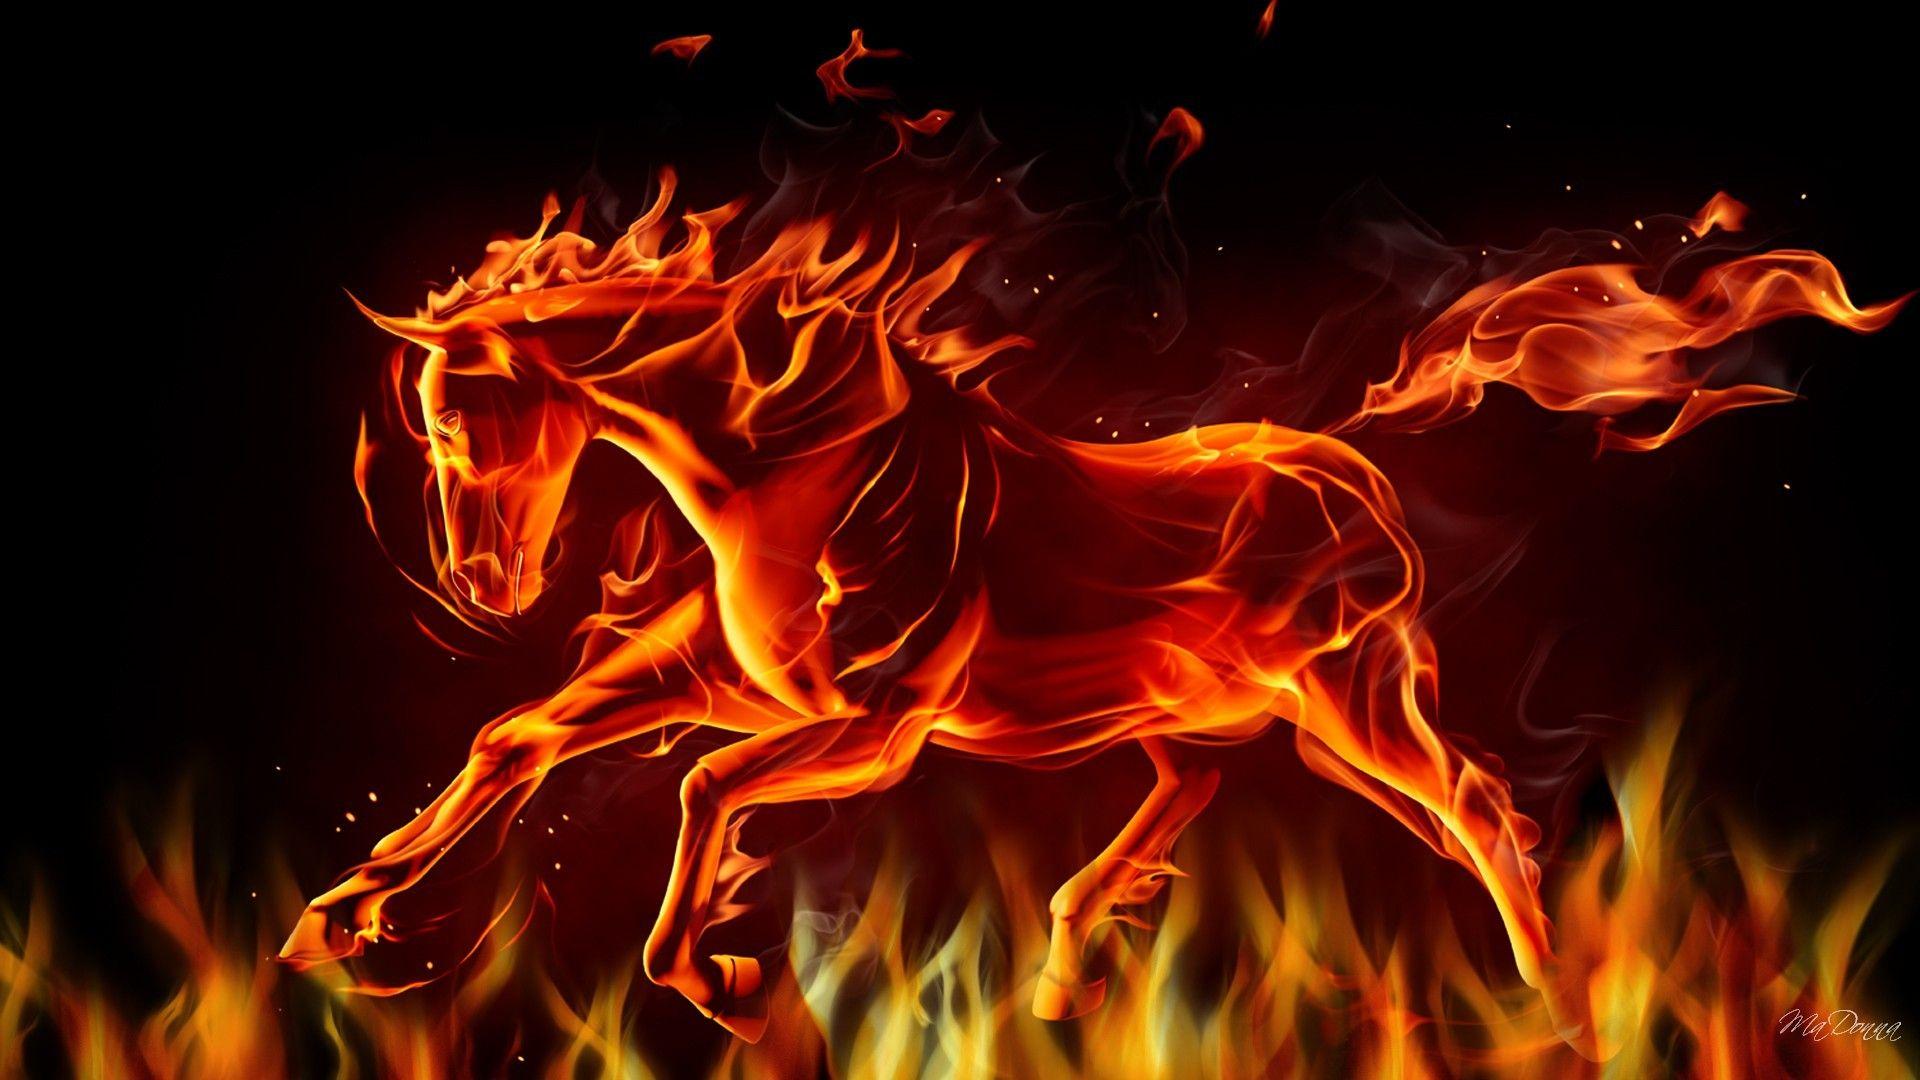 Horses Flames Fire Year Running Abstract New Horse Hot Jumping